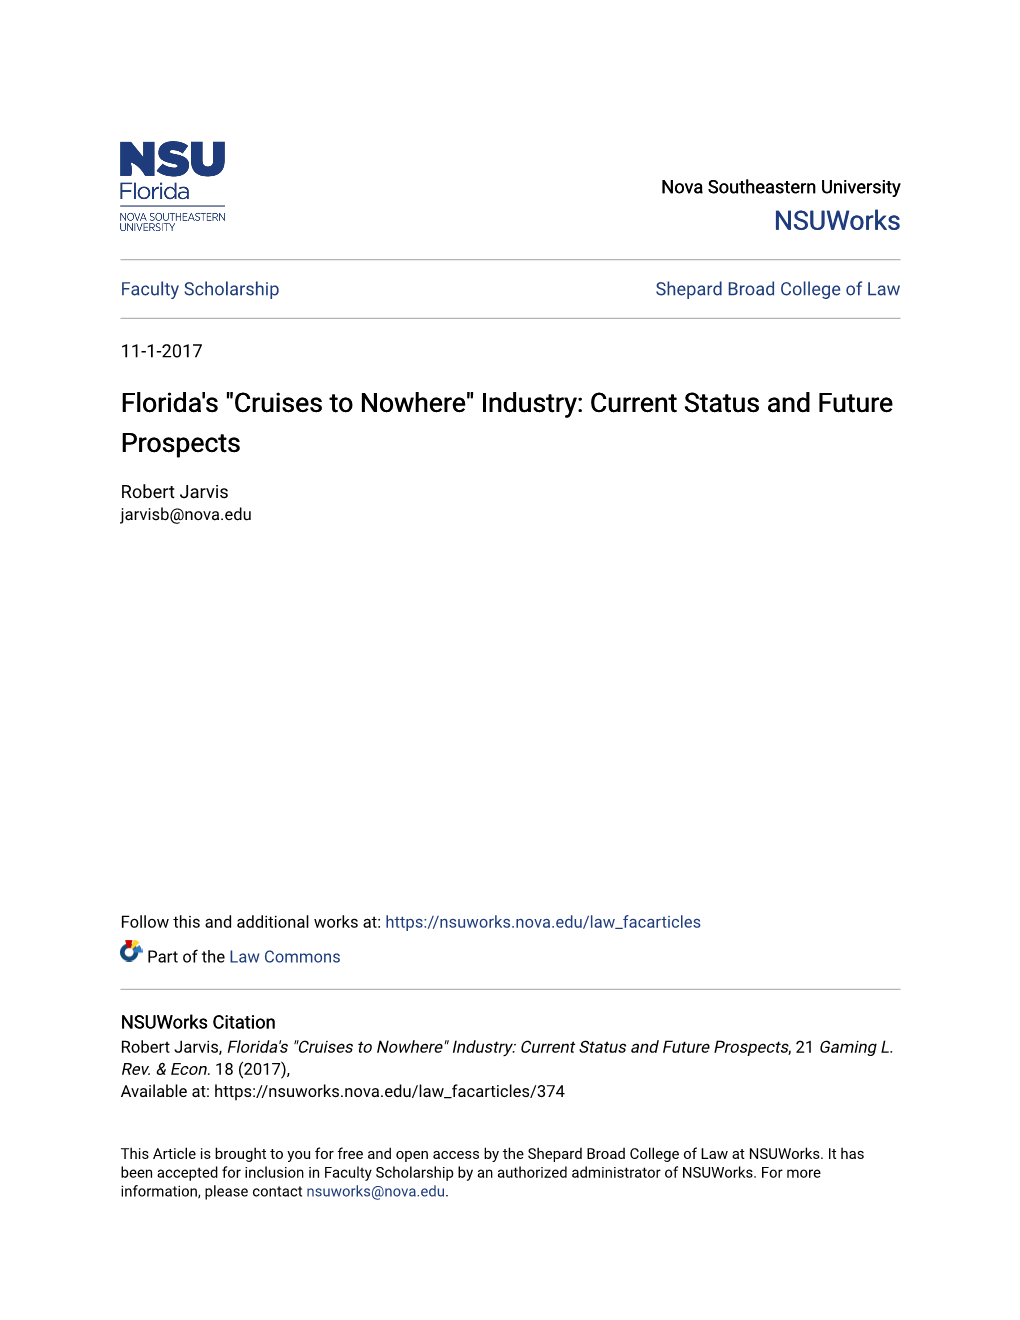 Florida's "Cruises to Nowhere" Industry: Current Status and Future Prospects